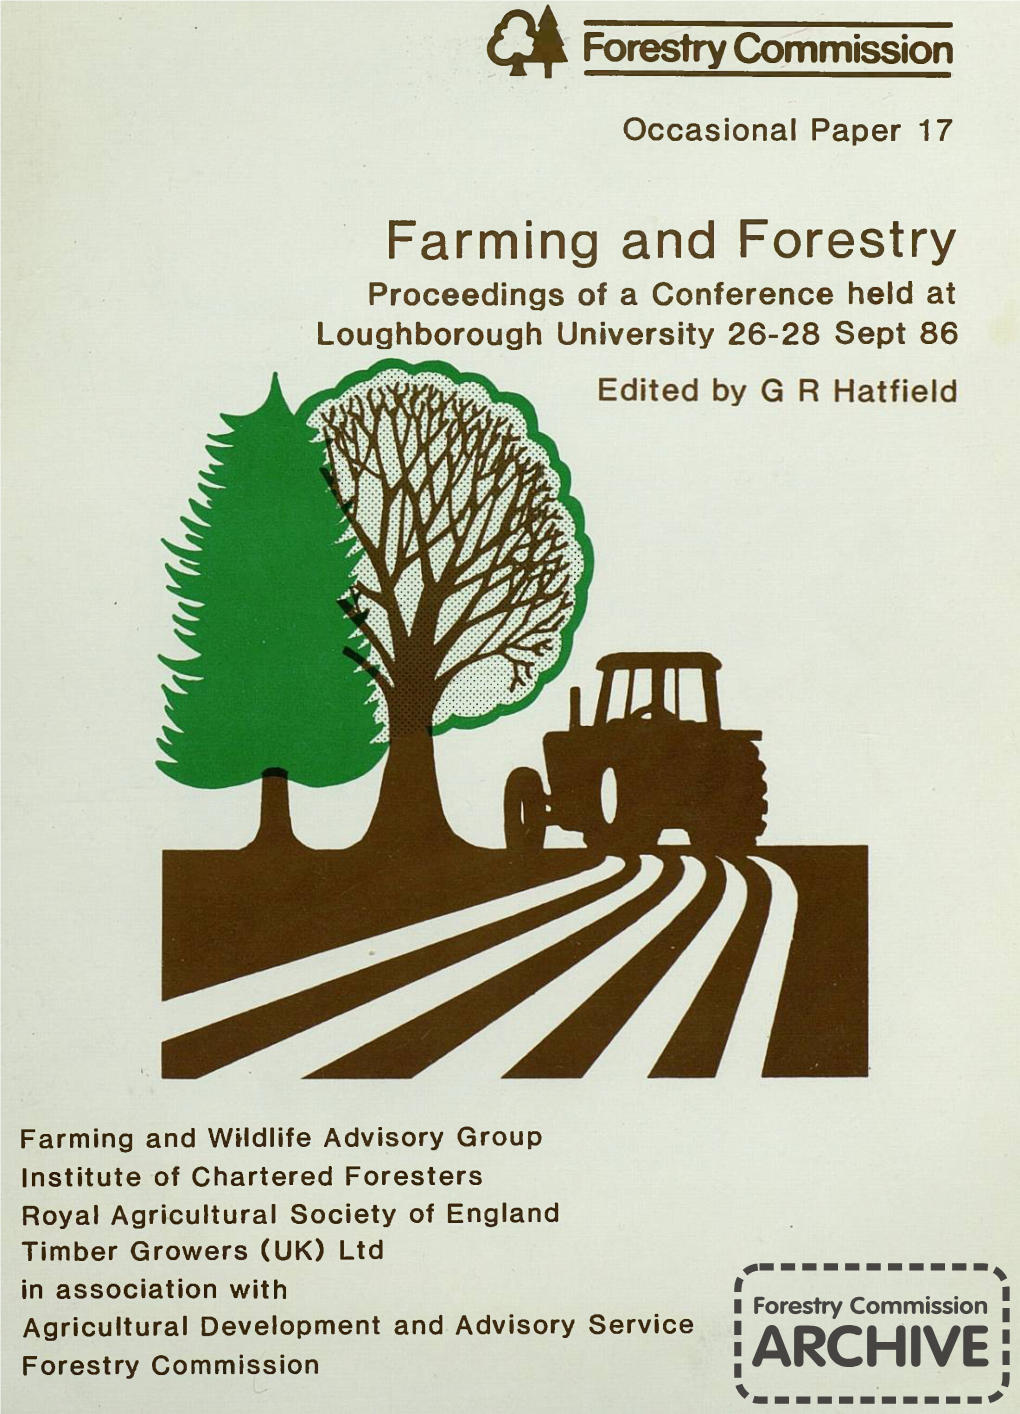 Farming and Forestry Proceedings of a Conference Held at Loughborough University 26-28 Sept 86